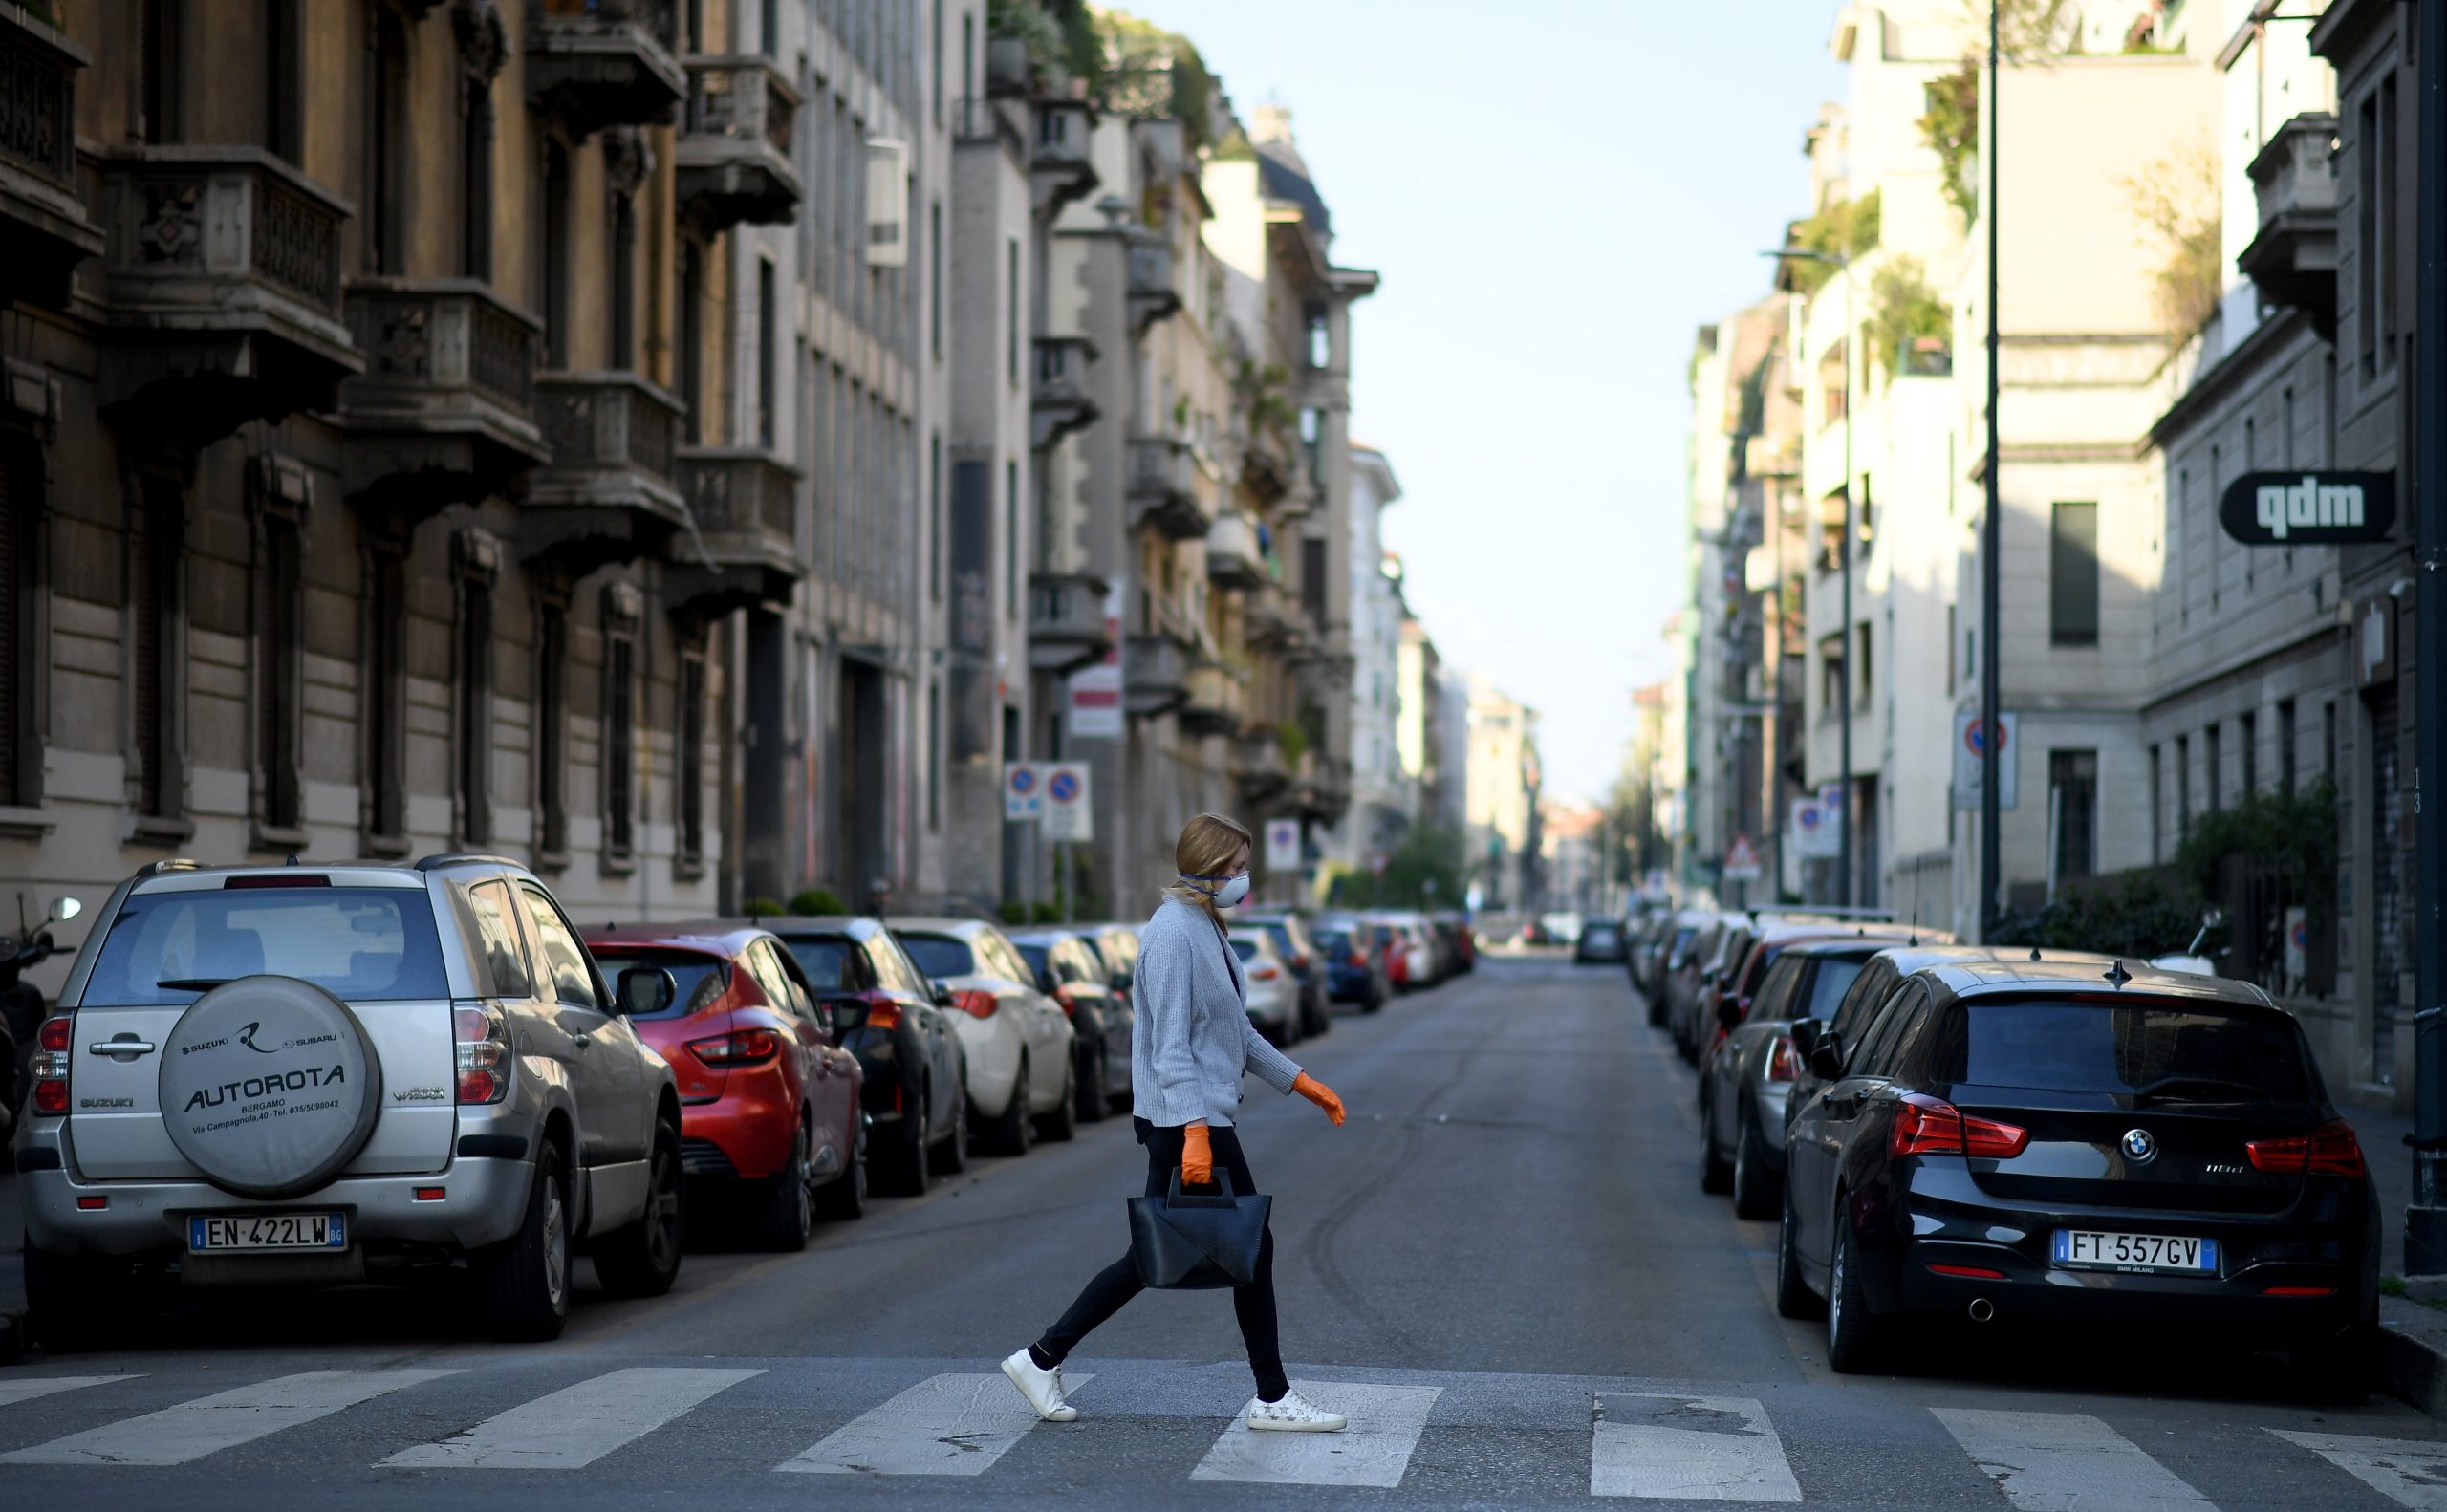 The outbreak of the coronavirus disease (COVID-19) in Milan A woman wearing a protective face mask crosses a street, amid the coronavirus disease (COVID-19) outbreak in Milan, Italy April 9, 2020. REUTERS/Daniele Mascolo DANIELE MASCOLO